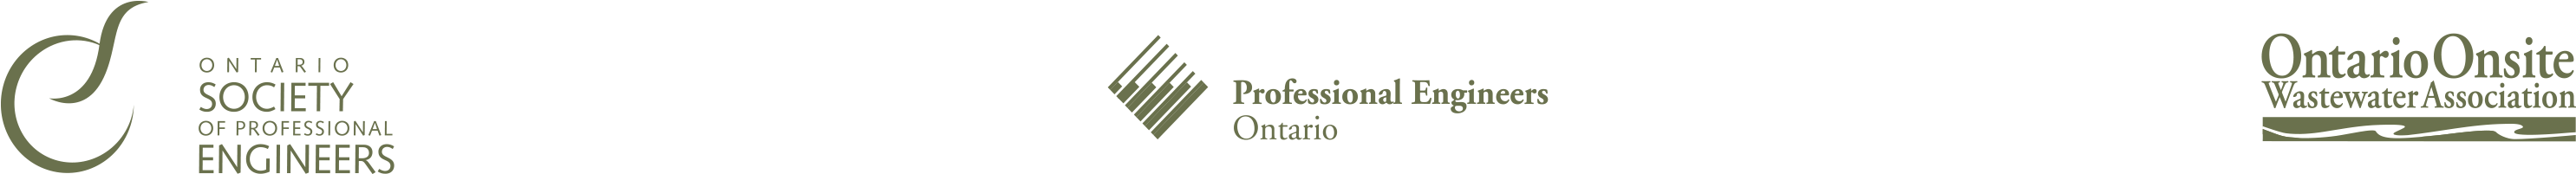 About - Professional Engineers Ontario (3000x234)